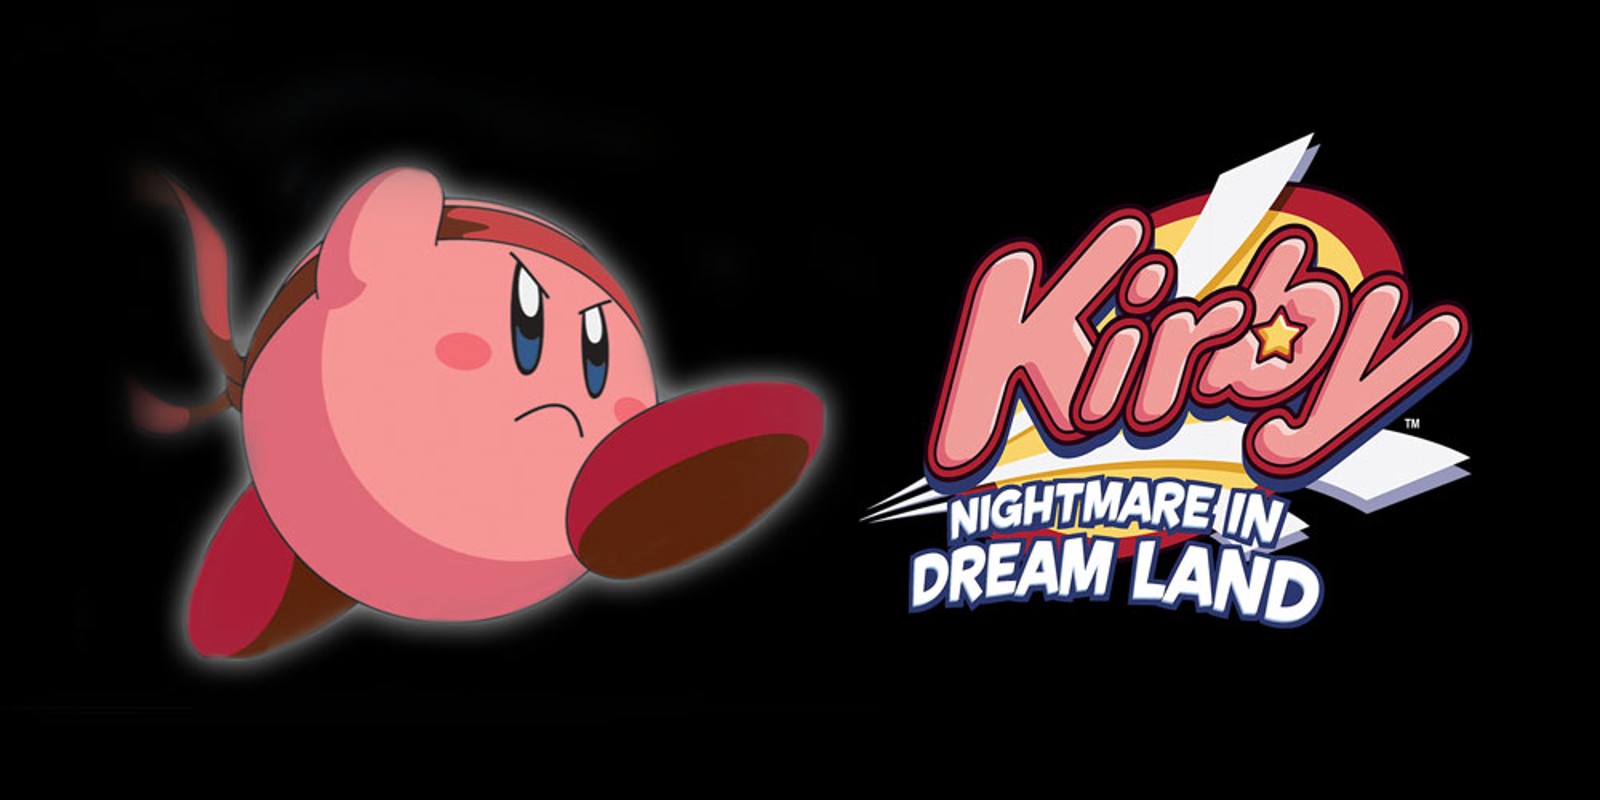  Kirby  Nightmare  in Dream Land  Game Boy Advance Juegos 